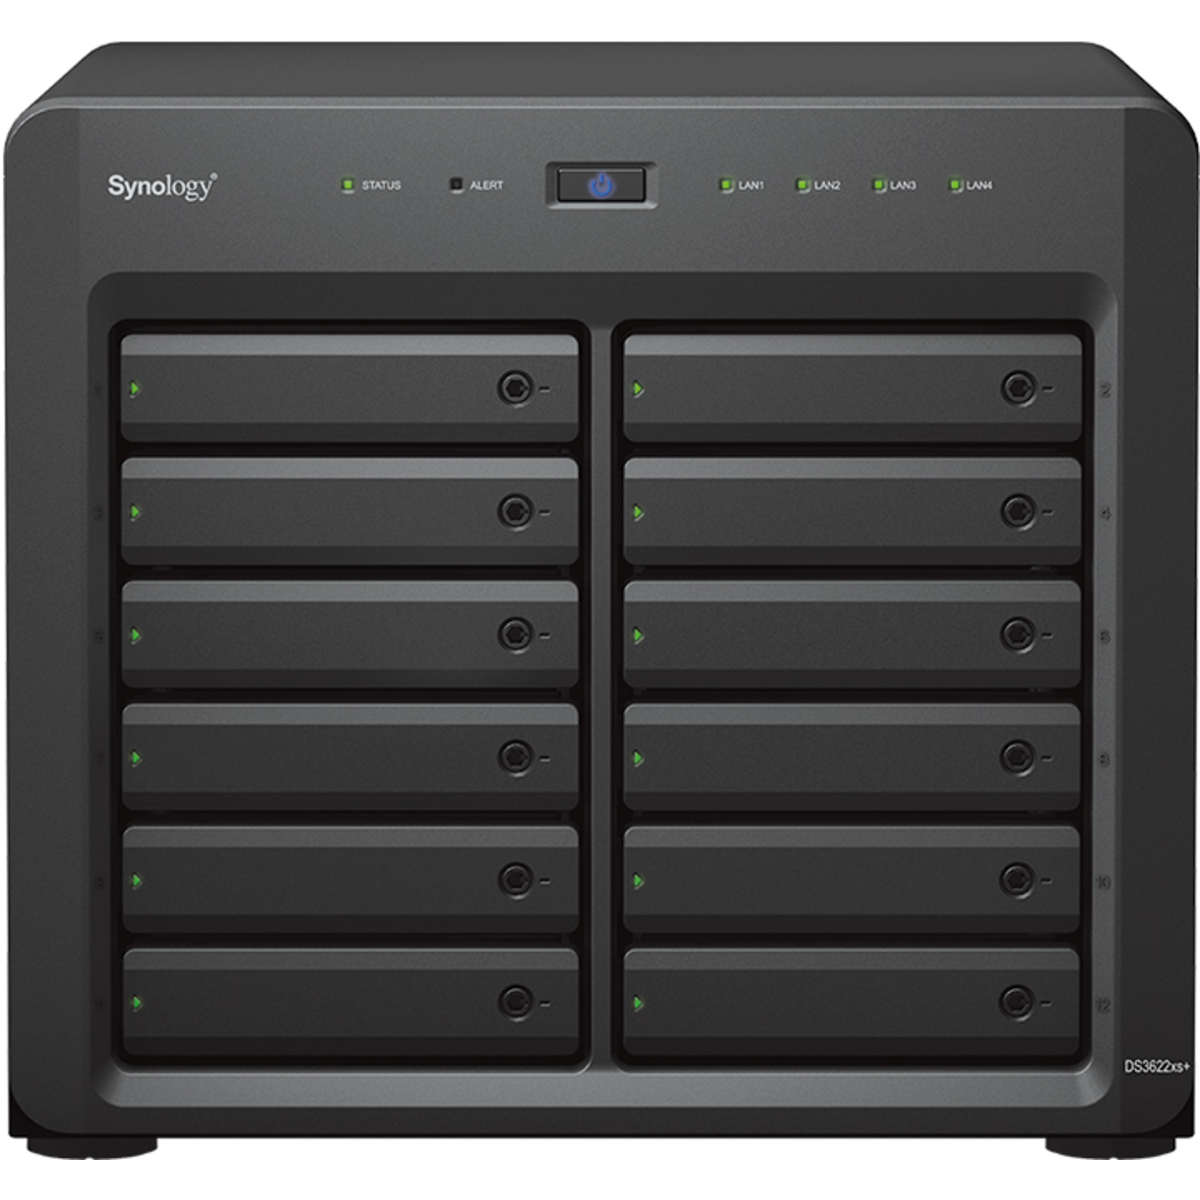 Synology DiskStation DS3622xs+ 220tb 12-Bay Desktop Multimedia / Power User / Business NAS - Network Attached Storage Device 10x22tb Seagate IronWolf Pro ST22000NT001 3.5 7200rpm SATA 6Gb/s HDD NAS Class Drives Installed - Burn-In Tested DiskStation DS3622xs+